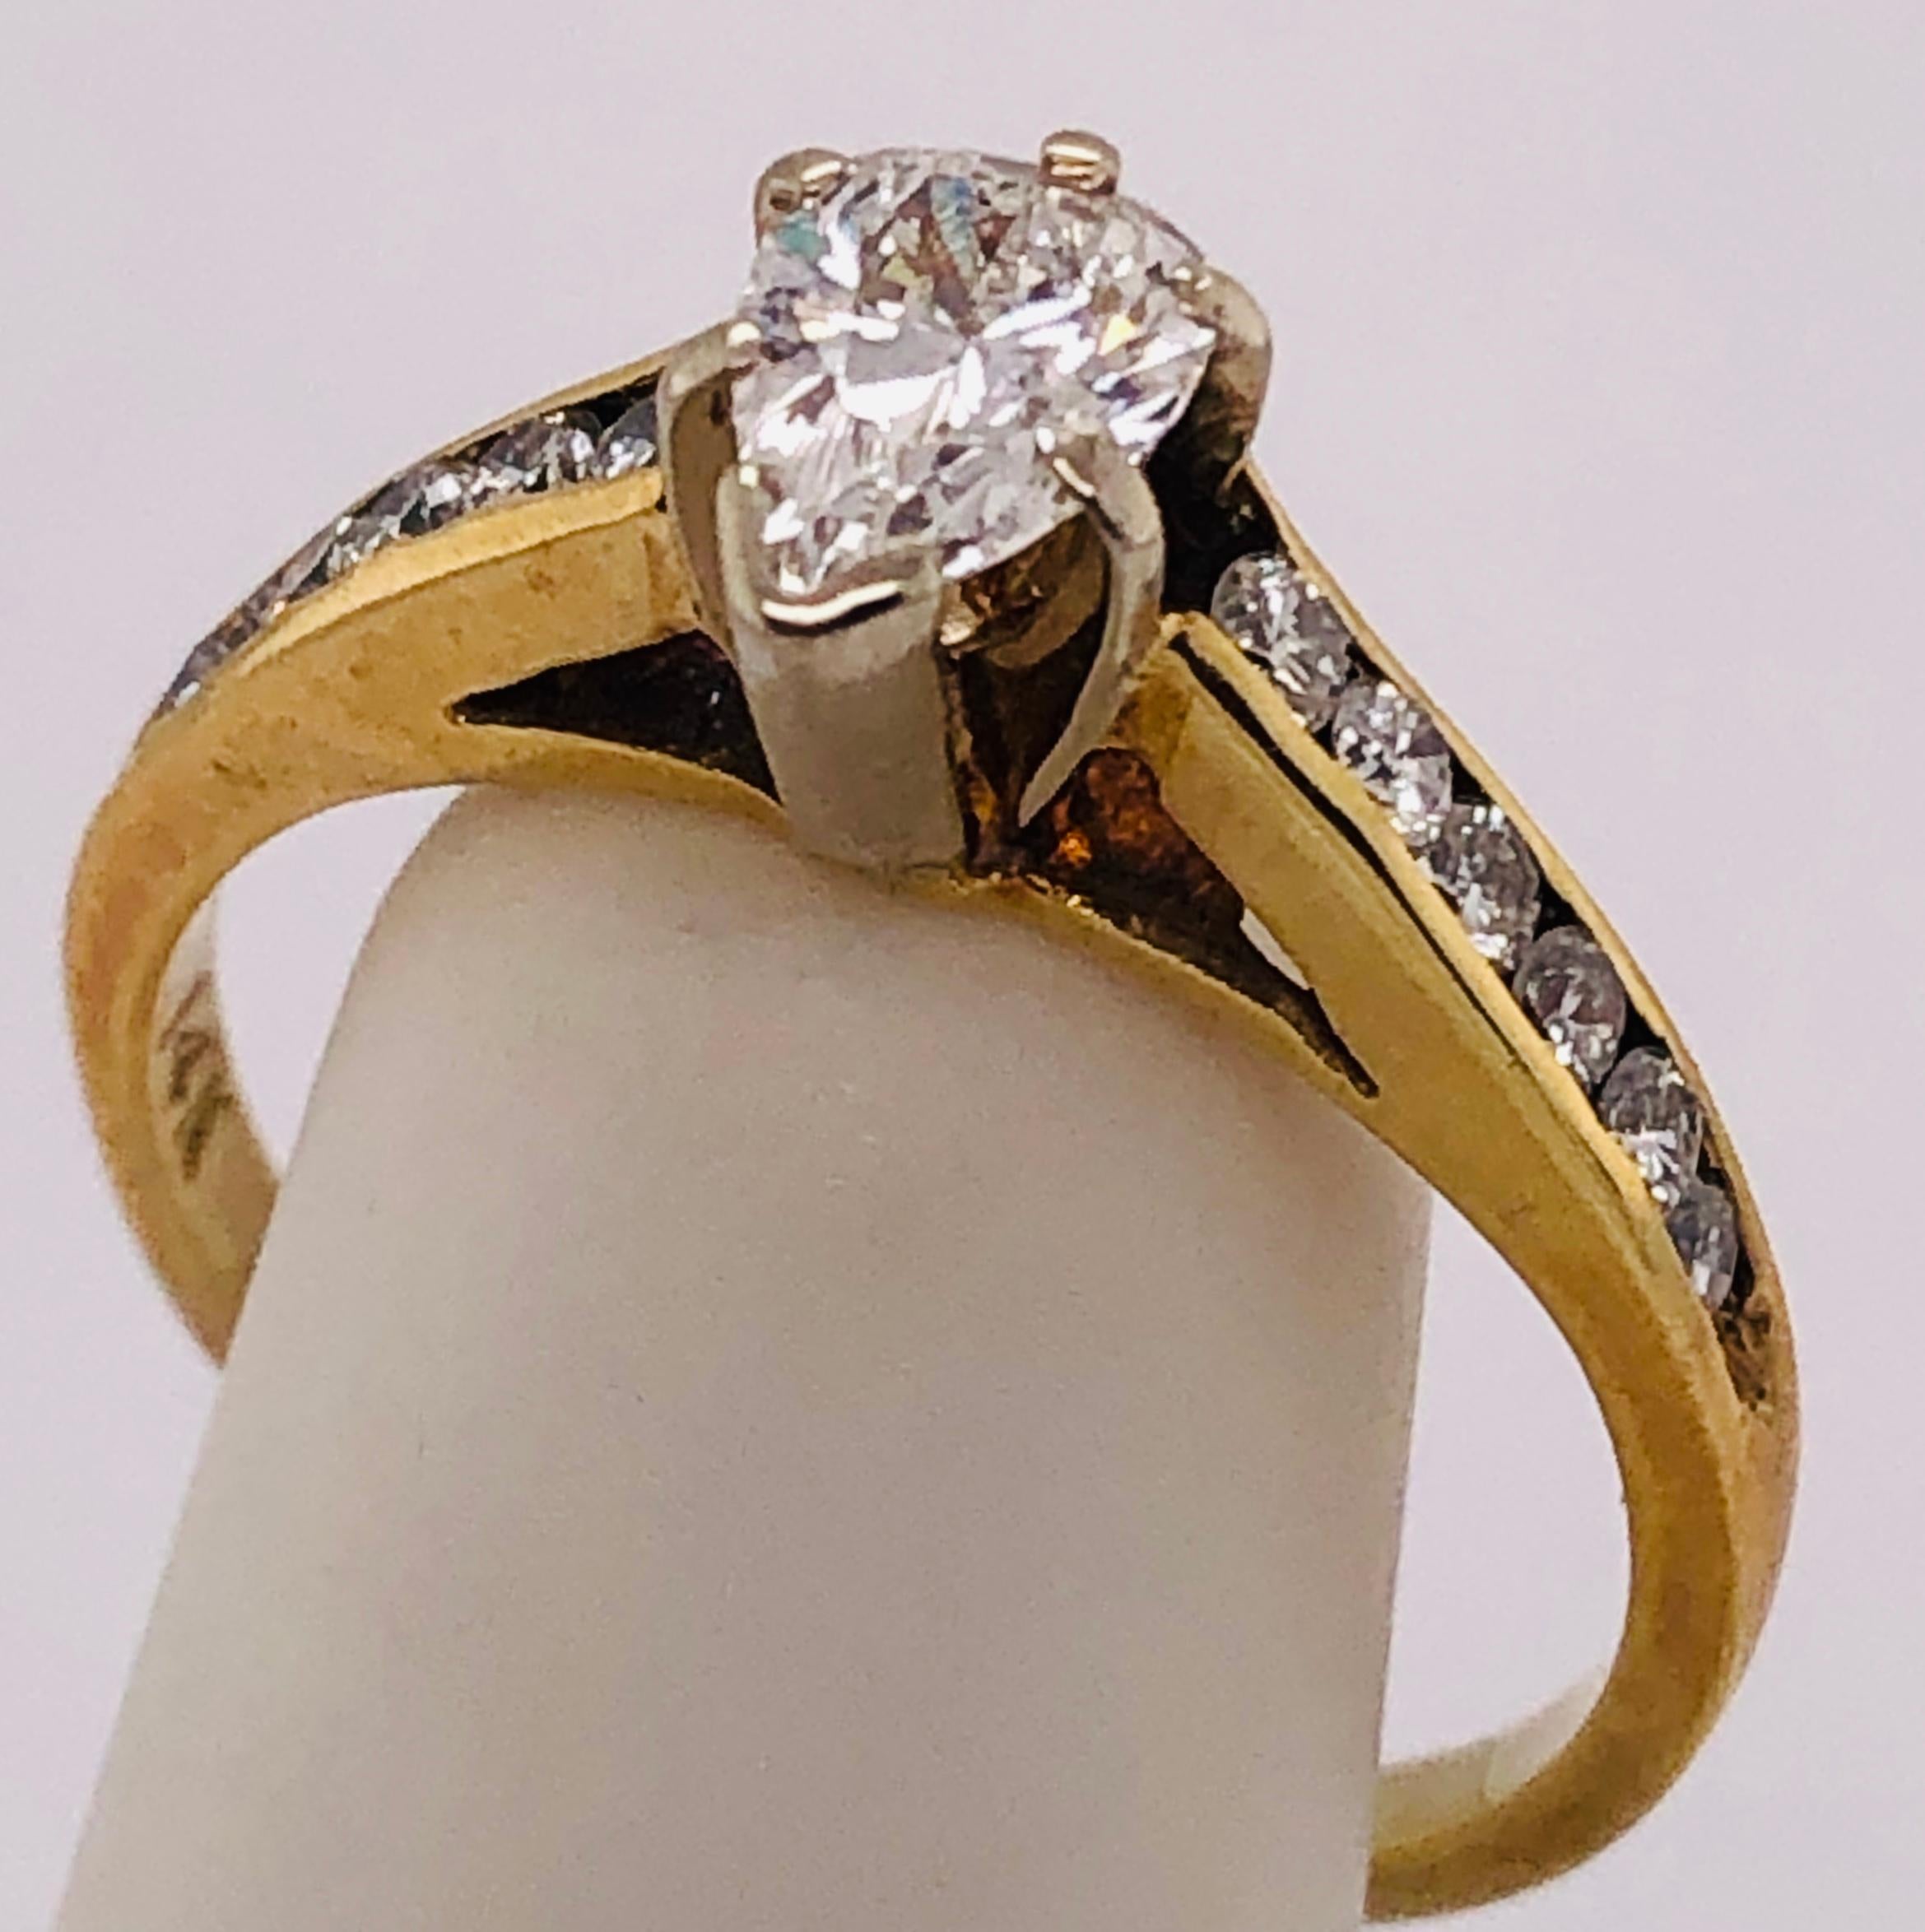 14Kt Yellow Gold With White Gold Prongs Engagement Bridal Ring 0.54 Total Diamond Weight.
Size 5.5